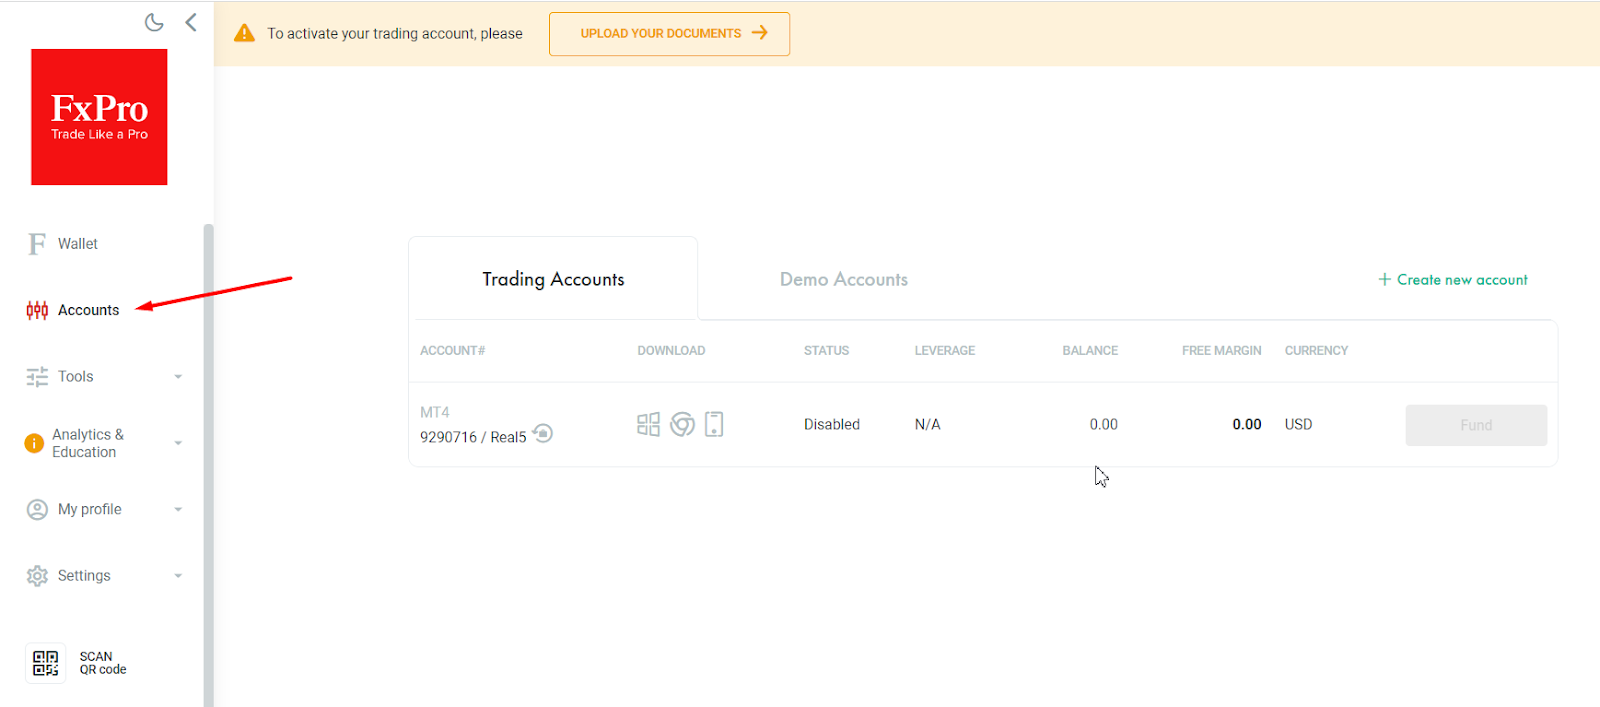 Review of FxPro Direct features – Accounts